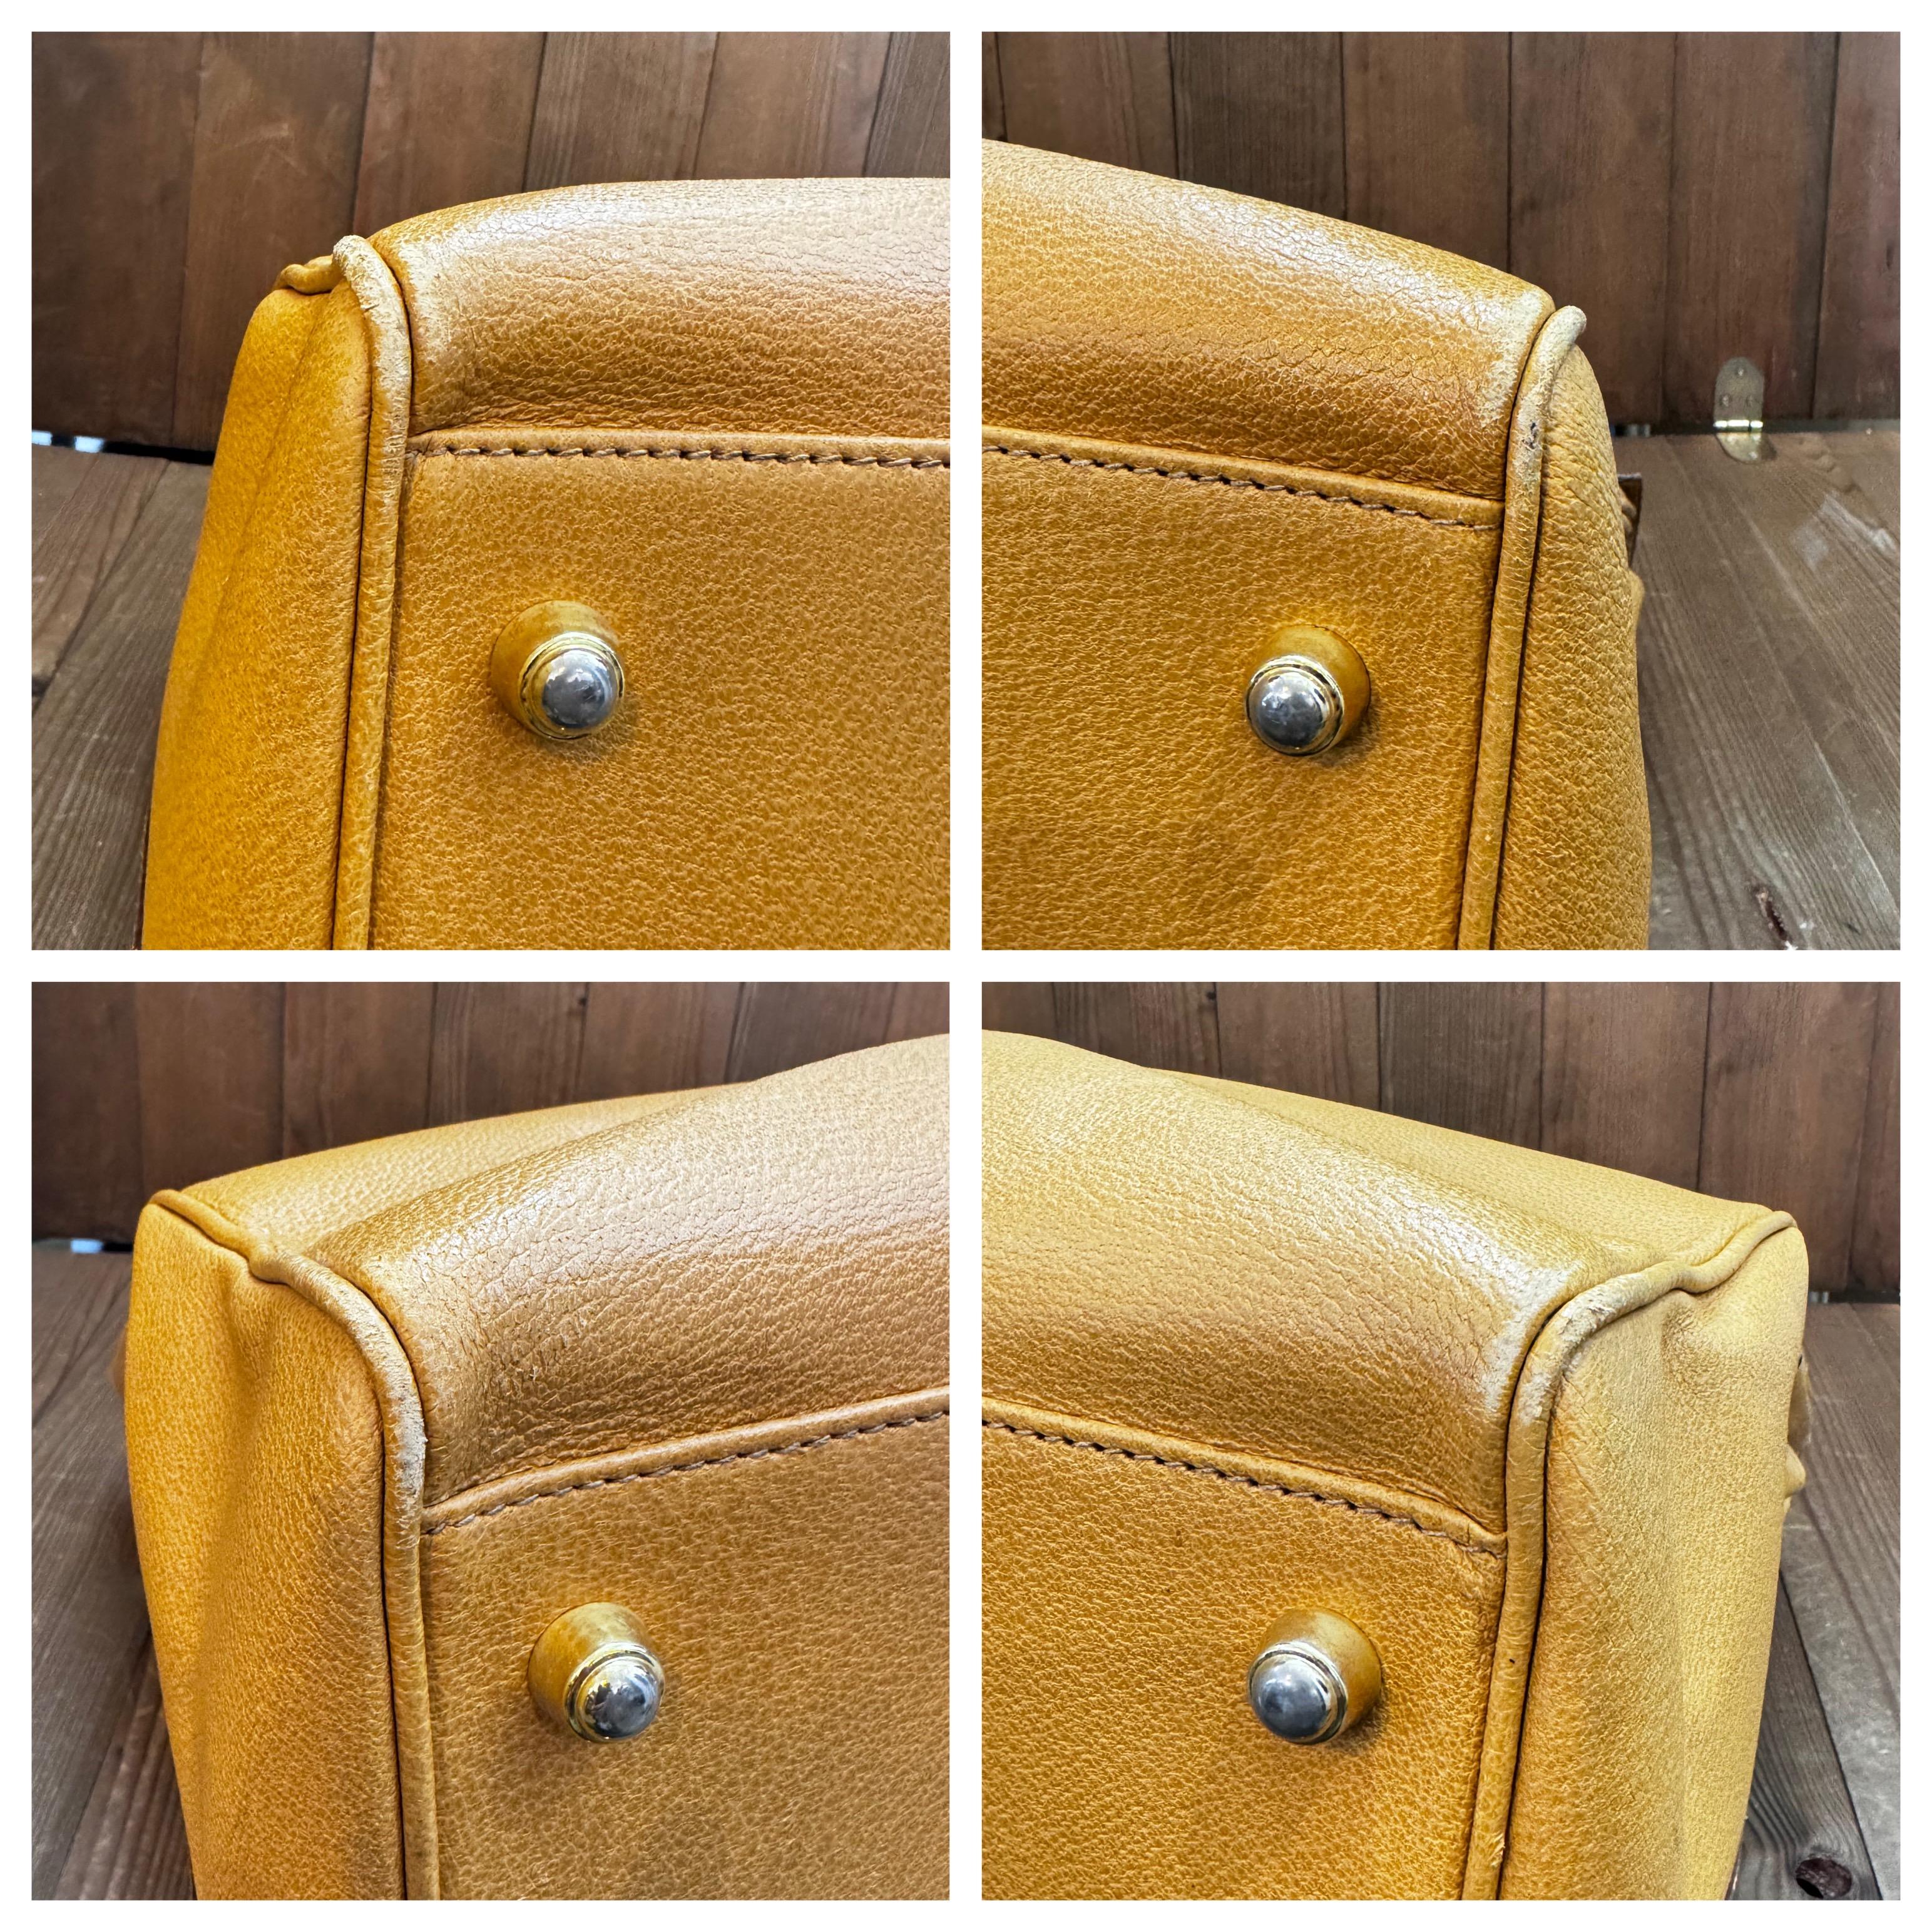 1990s Vintage GUCCI Pigskin Leather Duffle Bag XXL Mustard For Sale 3